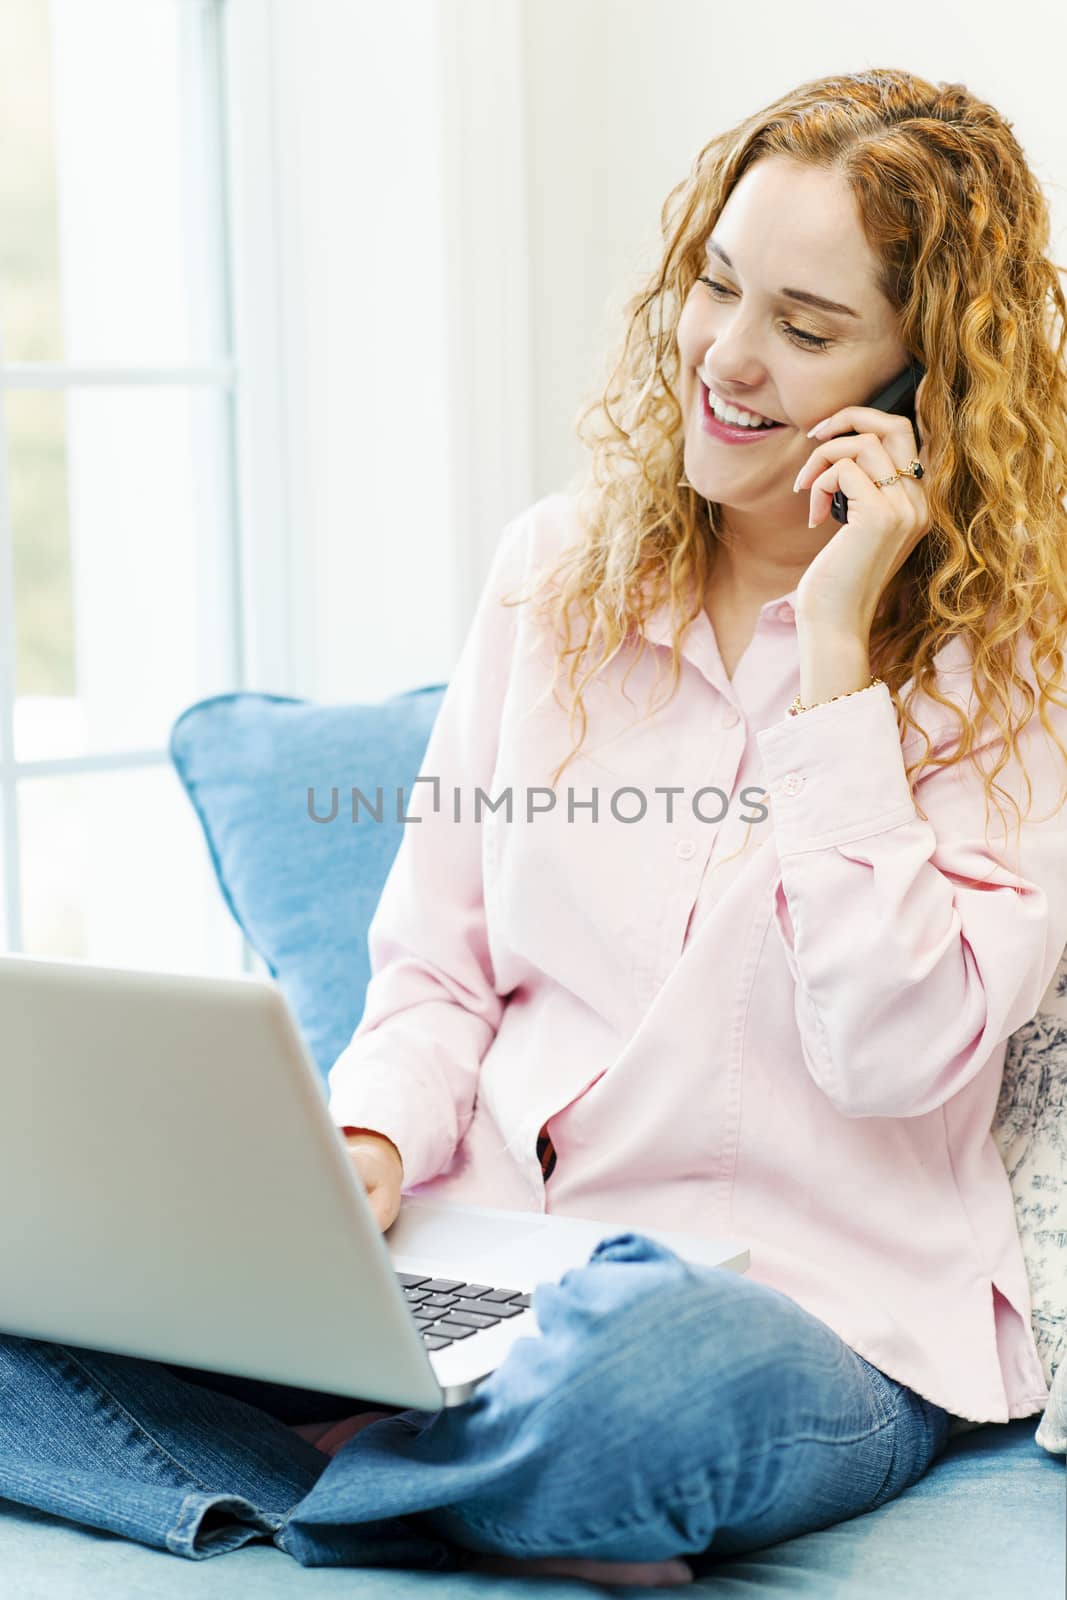 Woman talking on phone and using computer by elenathewise